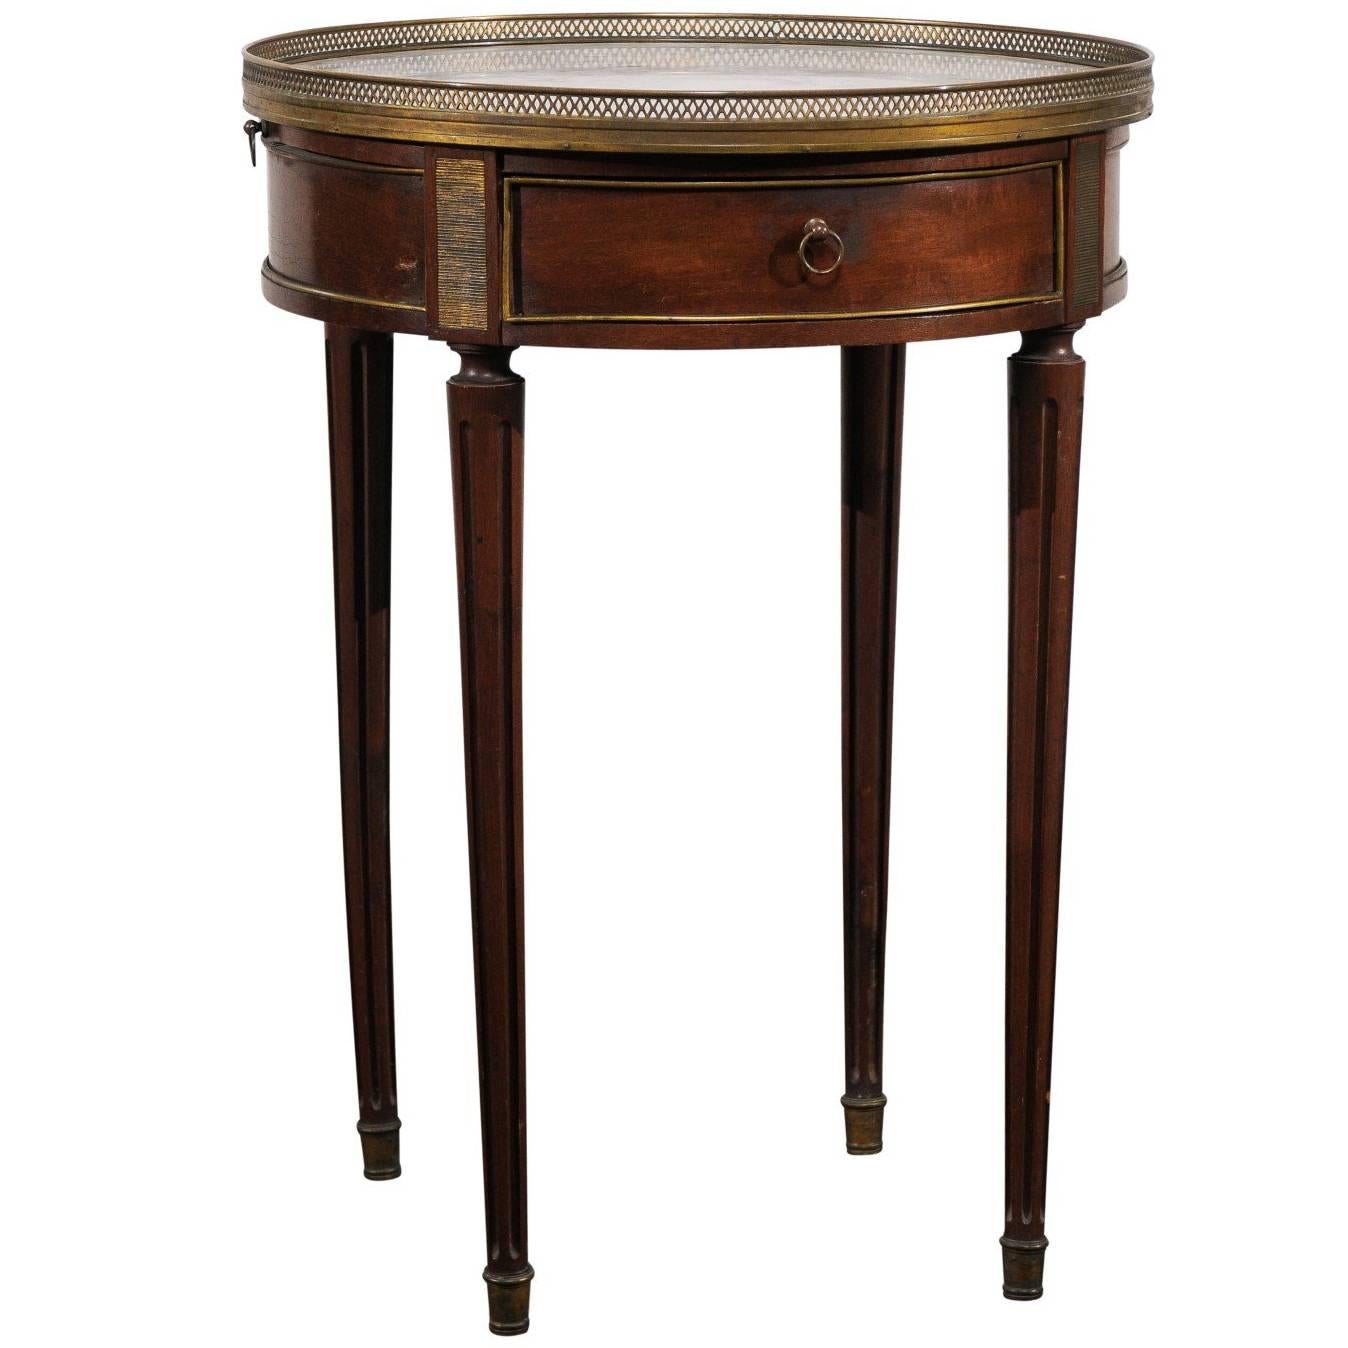 Late 19th Century circa 1890 French Walnut Marble Top Bouillote Table